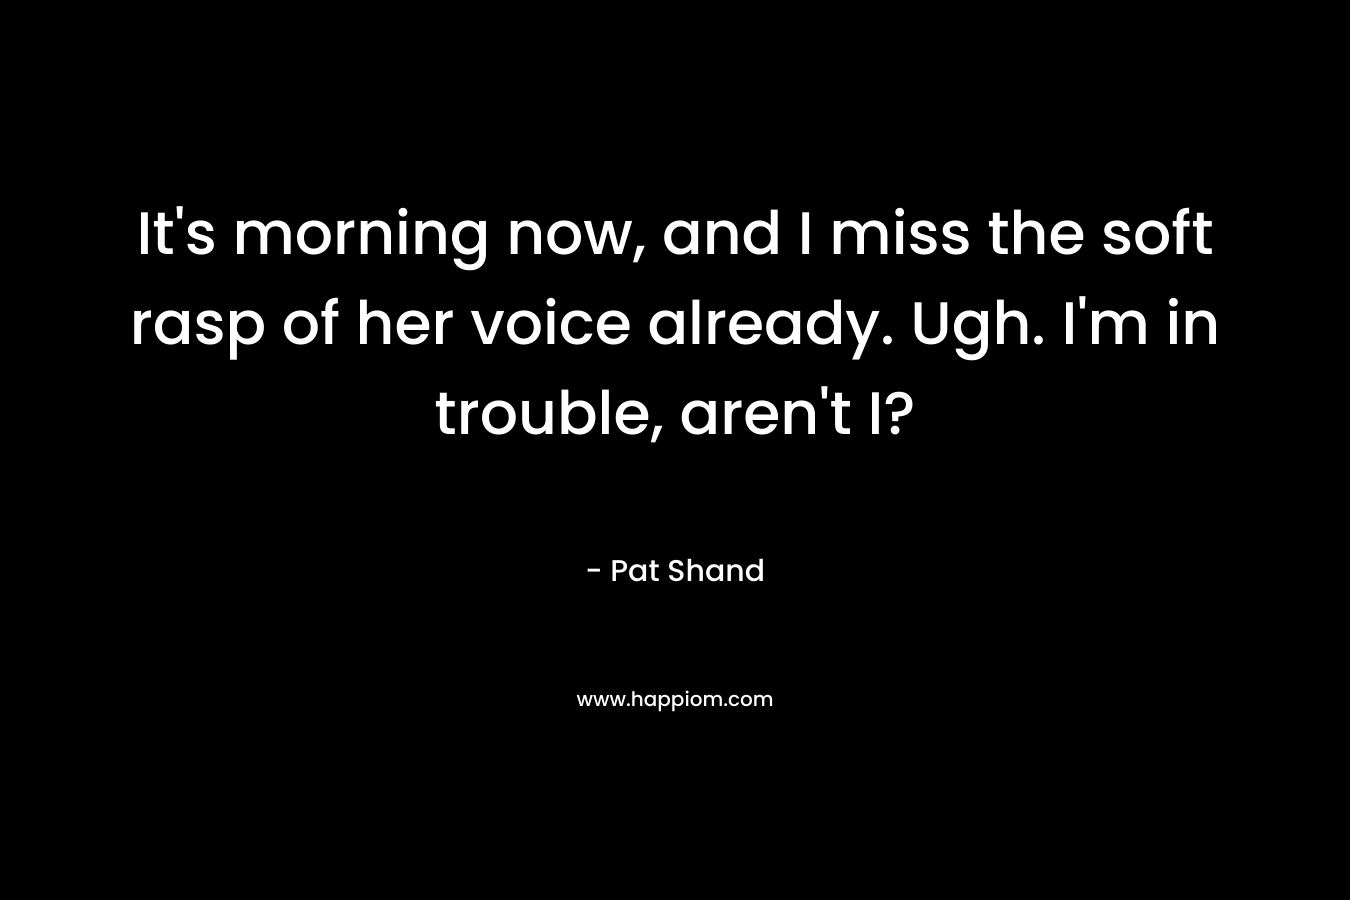 It’s morning now, and I miss the soft rasp of her voice already. Ugh. I’m in trouble, aren’t I? – Pat Shand